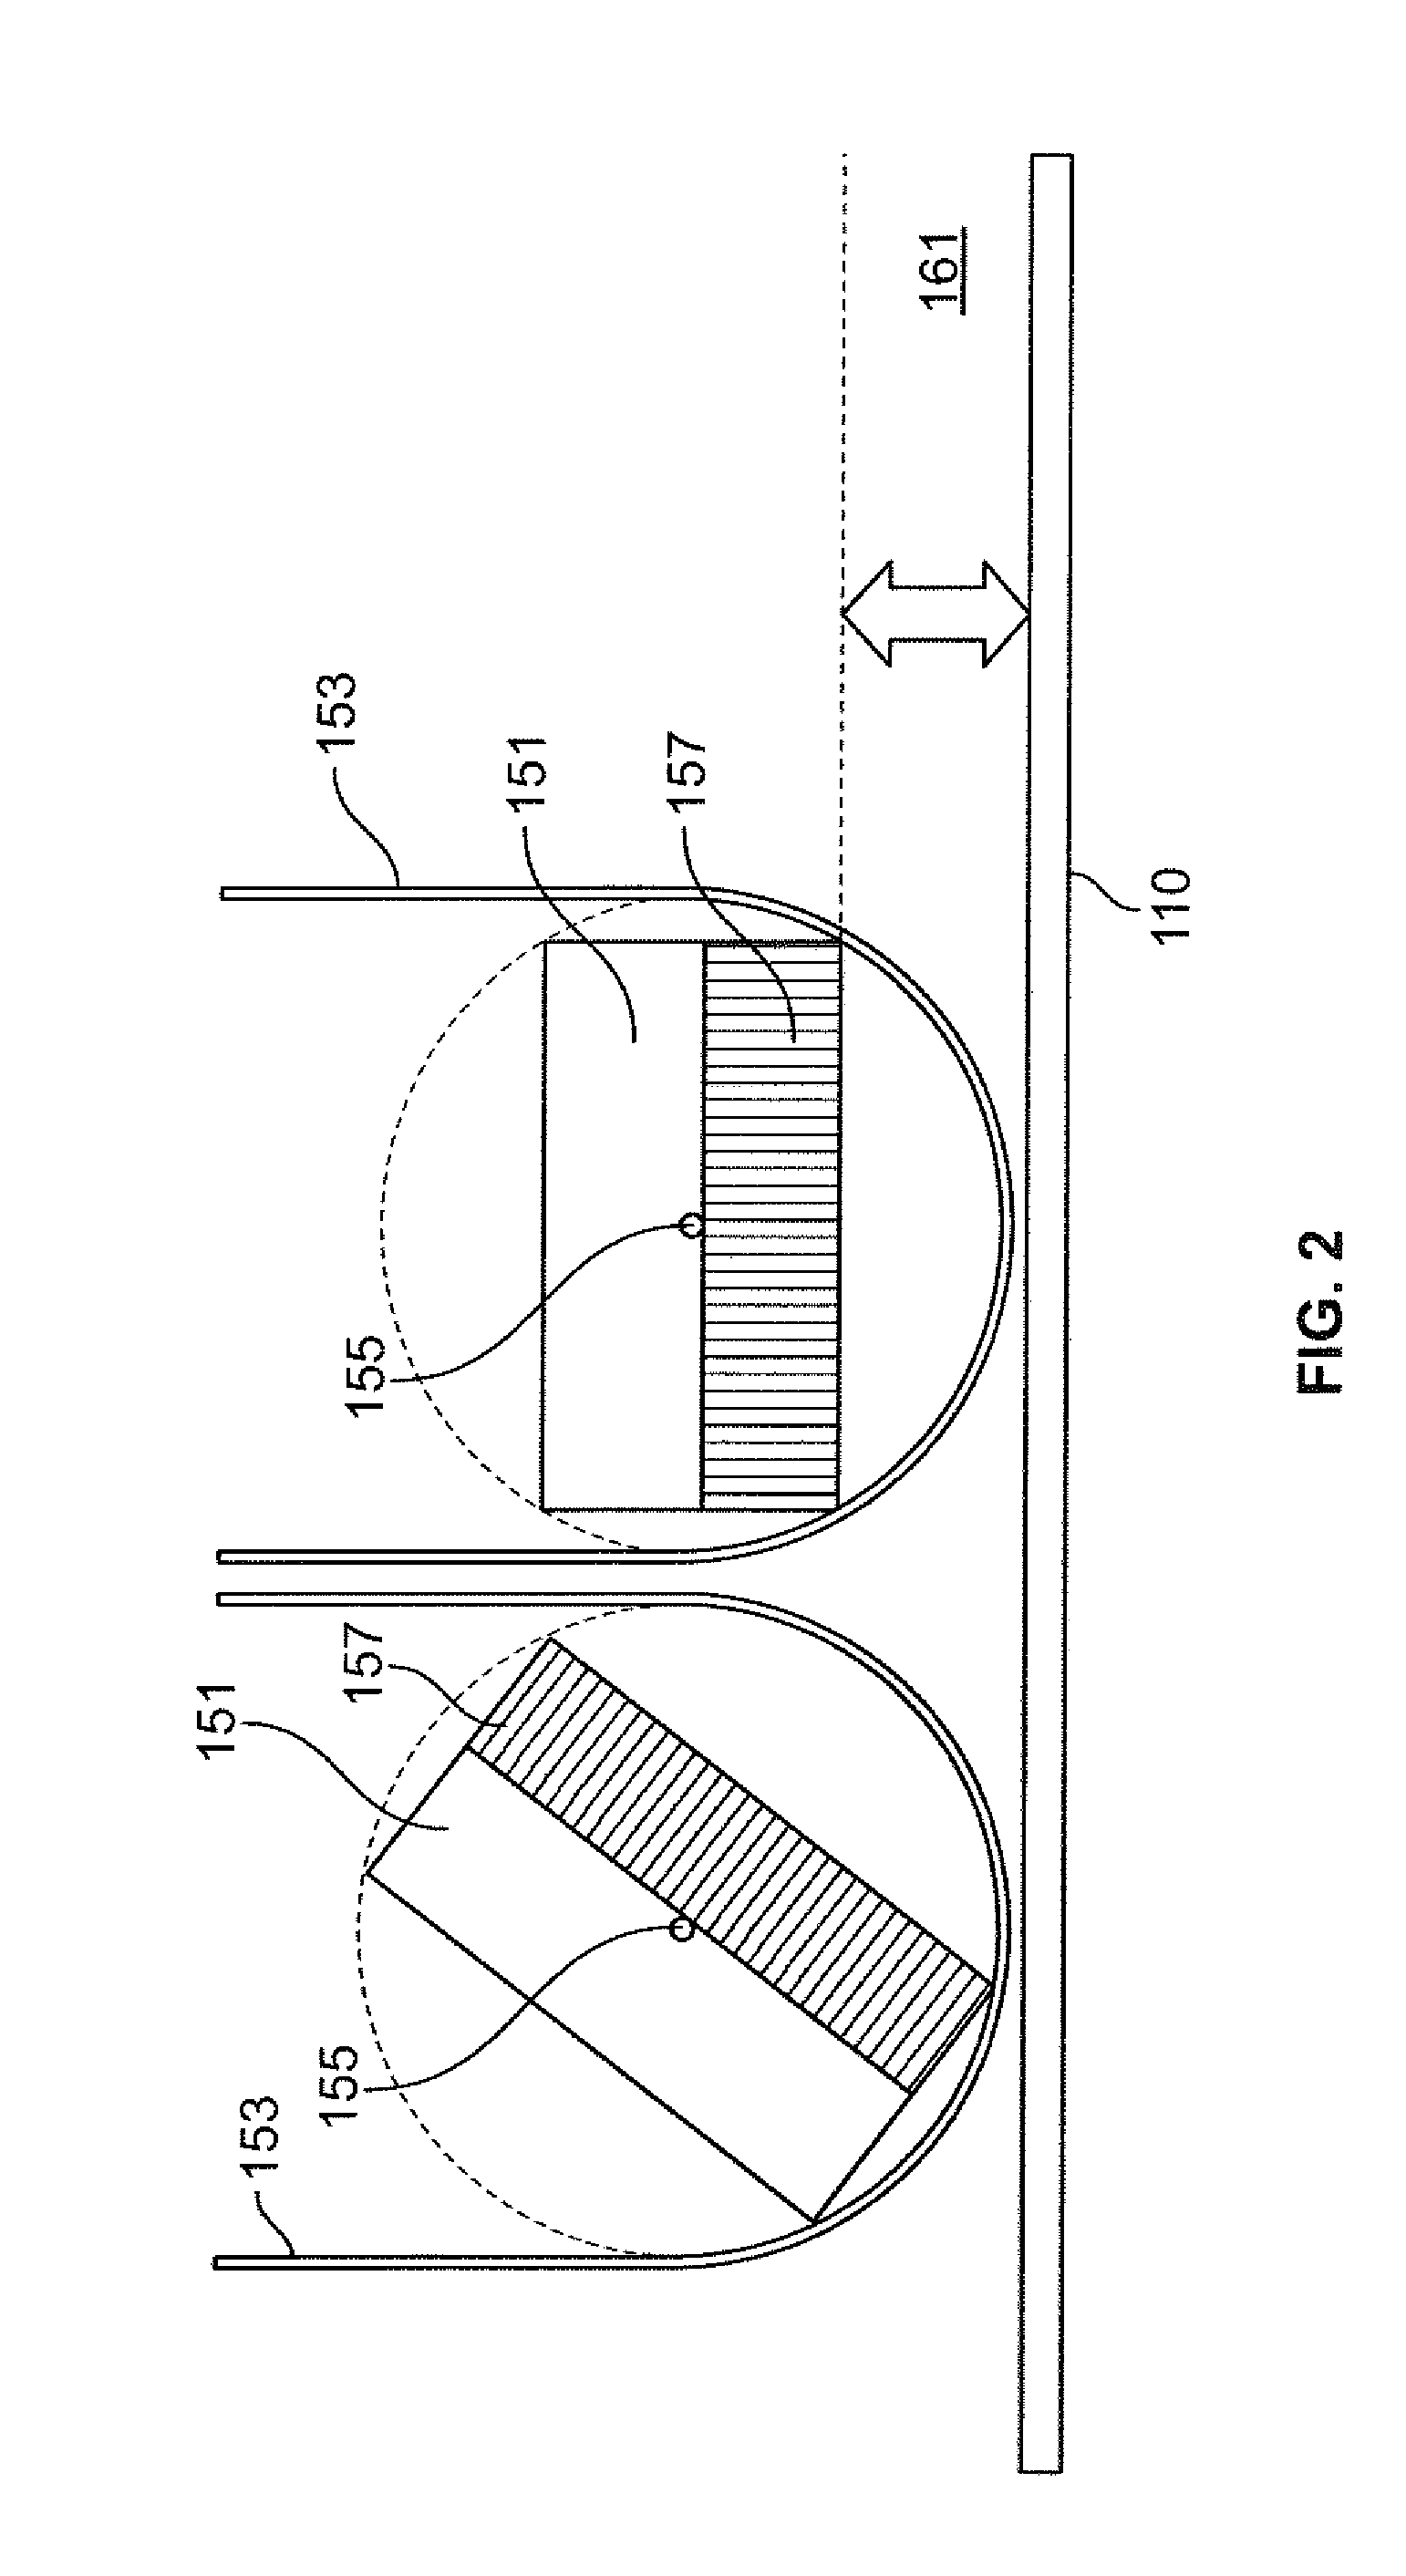 Systems and methods for controlling motion of detectors having moving detector heads